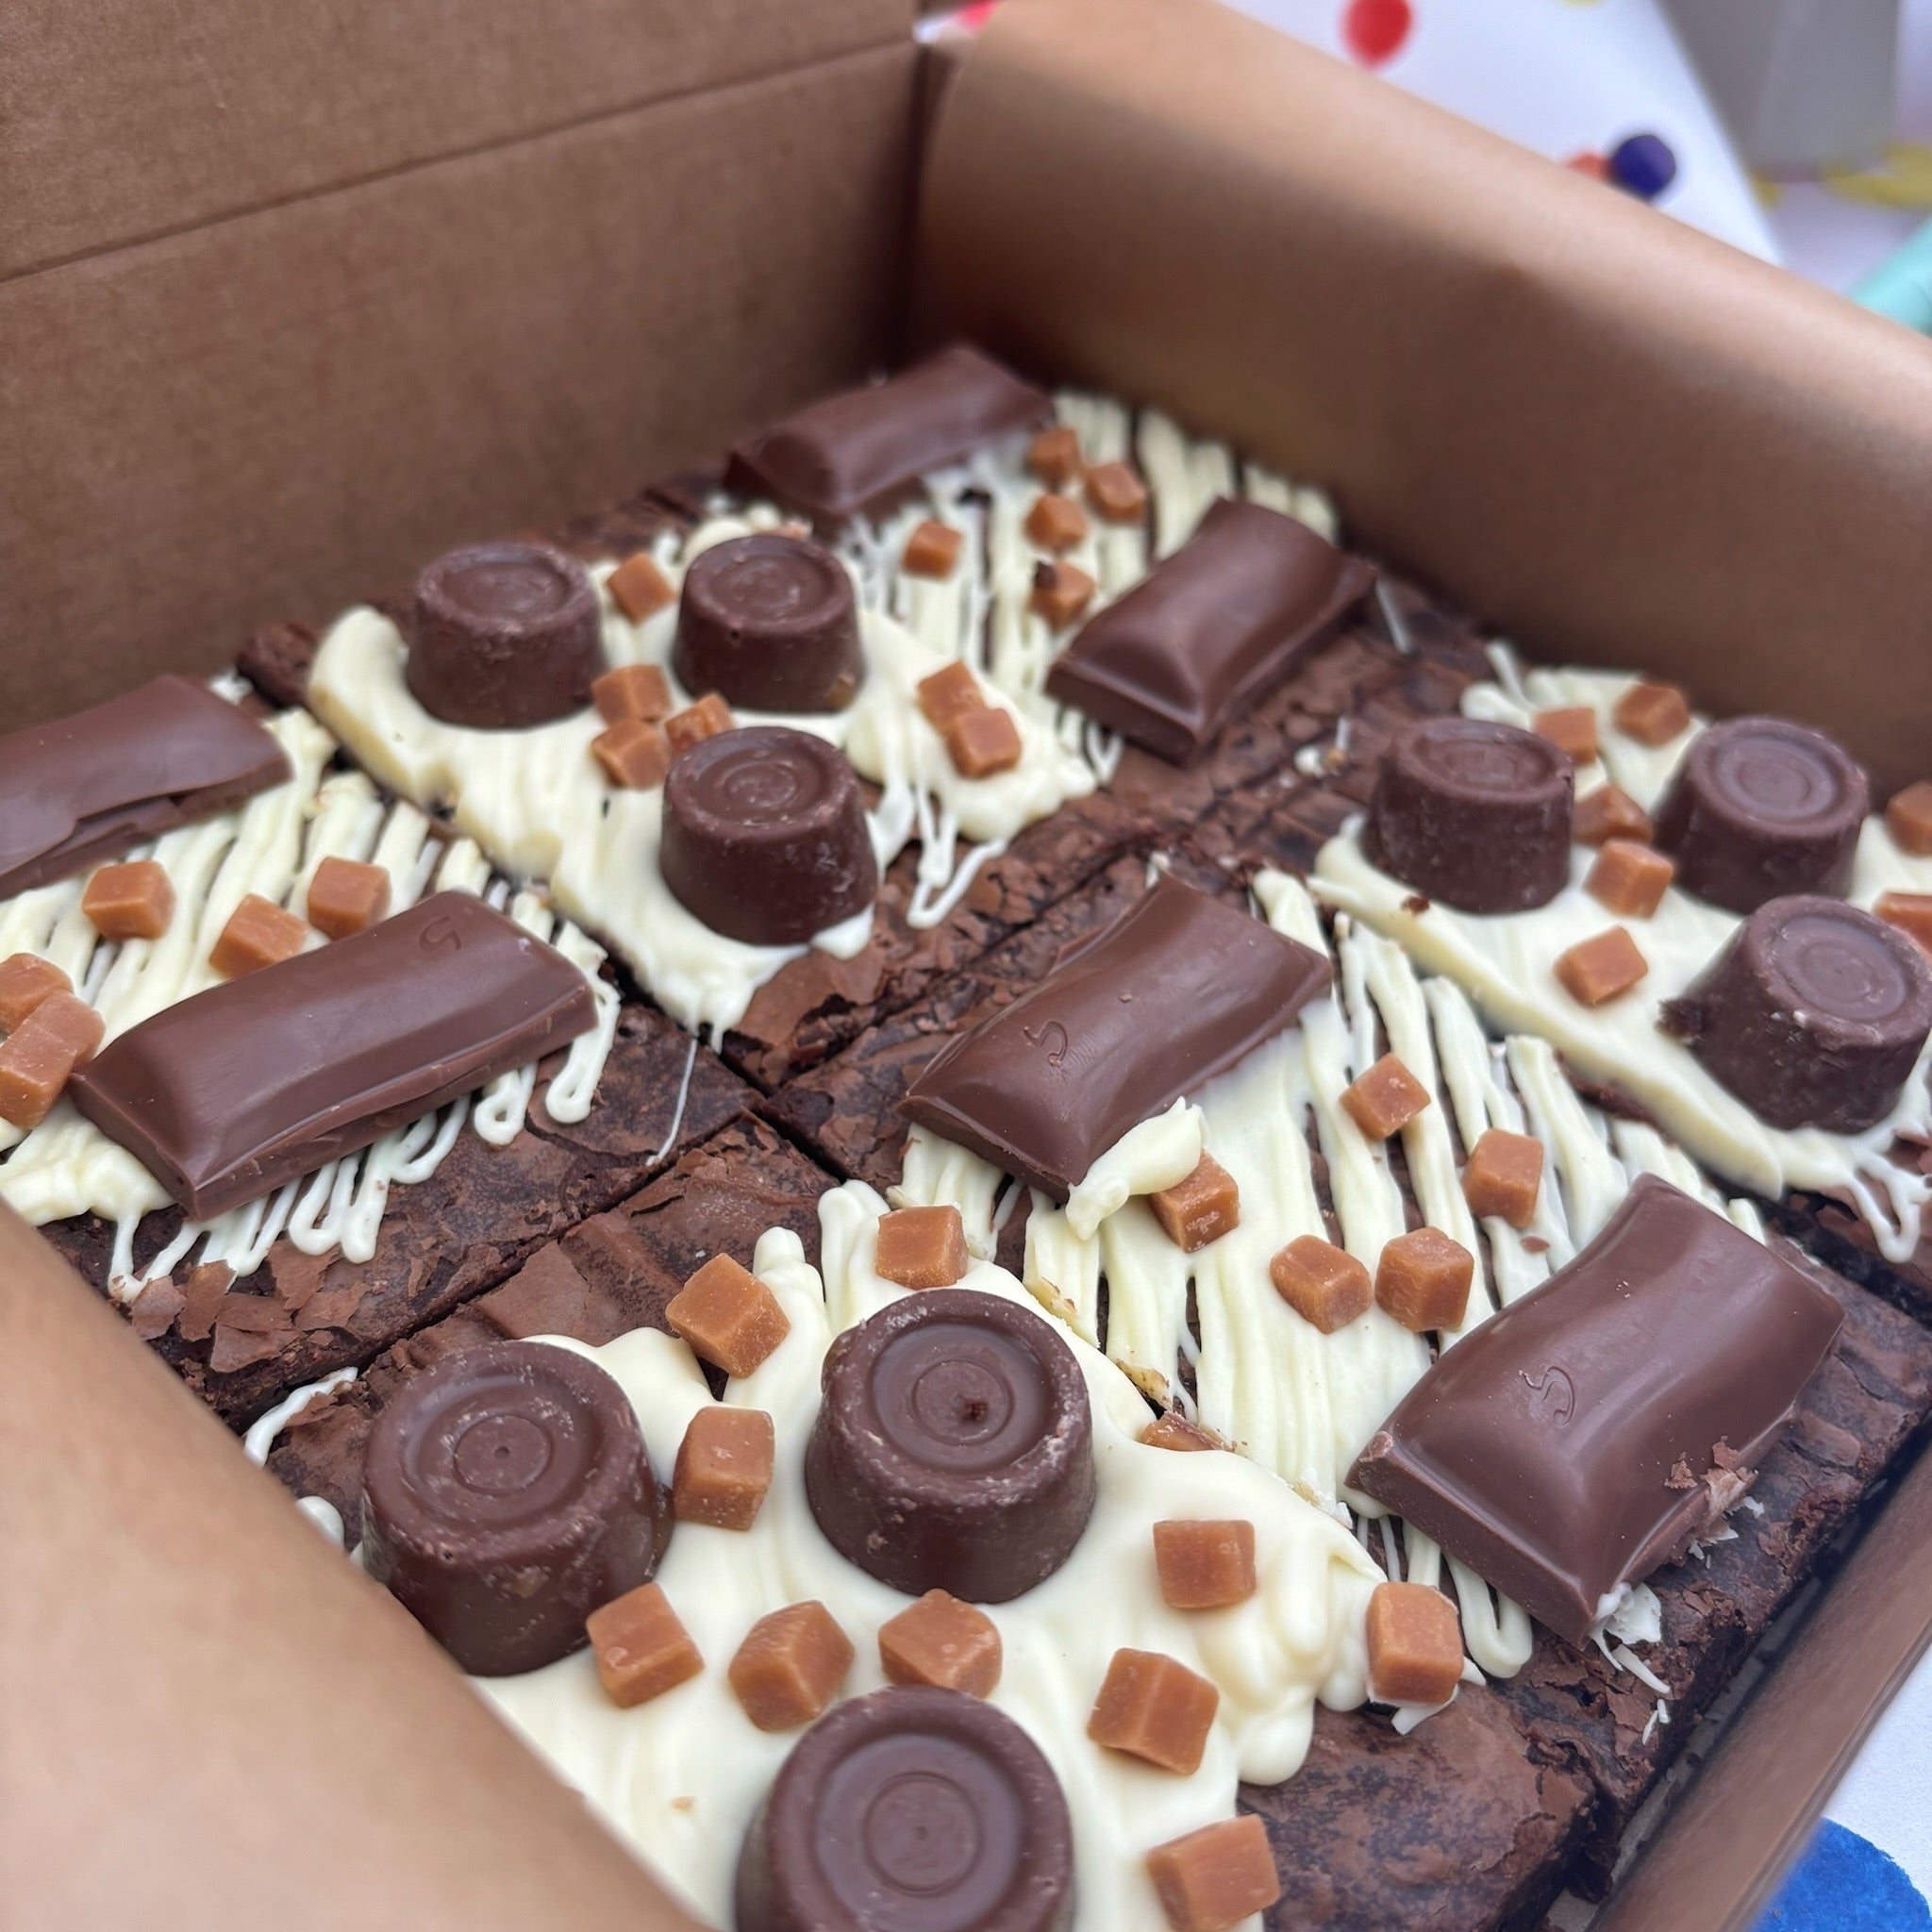 The Brownie Box Uk Postal brownies delivered nationwide. Caramel and rolo lover birthday brownie box of 6.